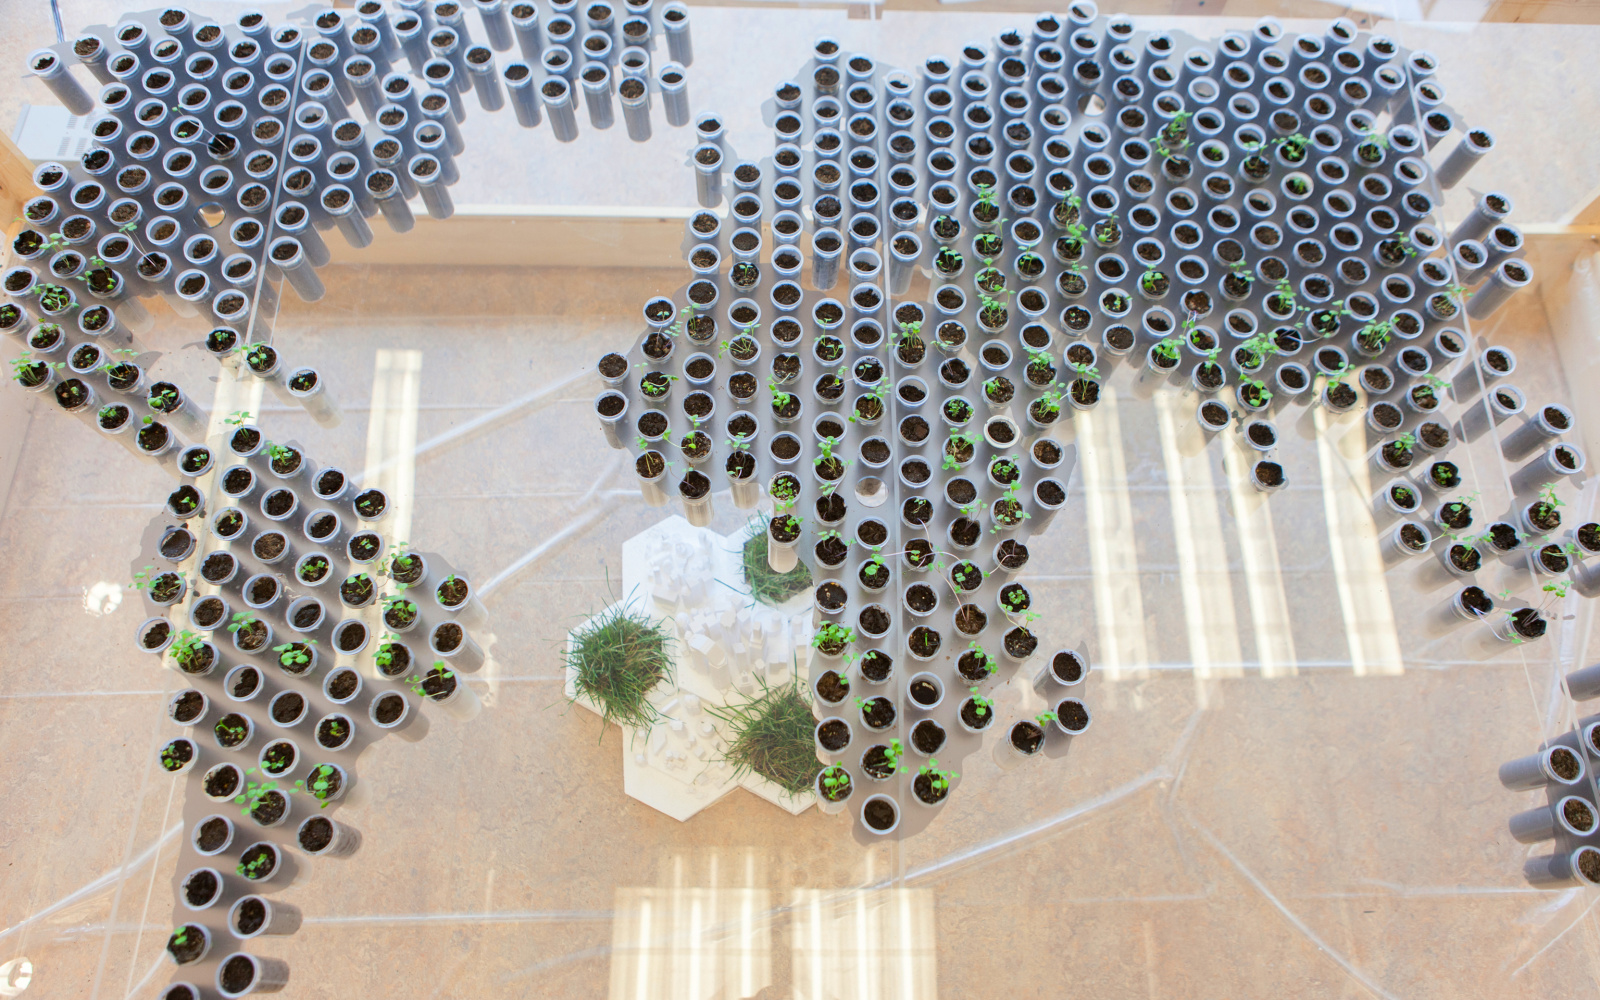 Map of the earth made of small pot plants